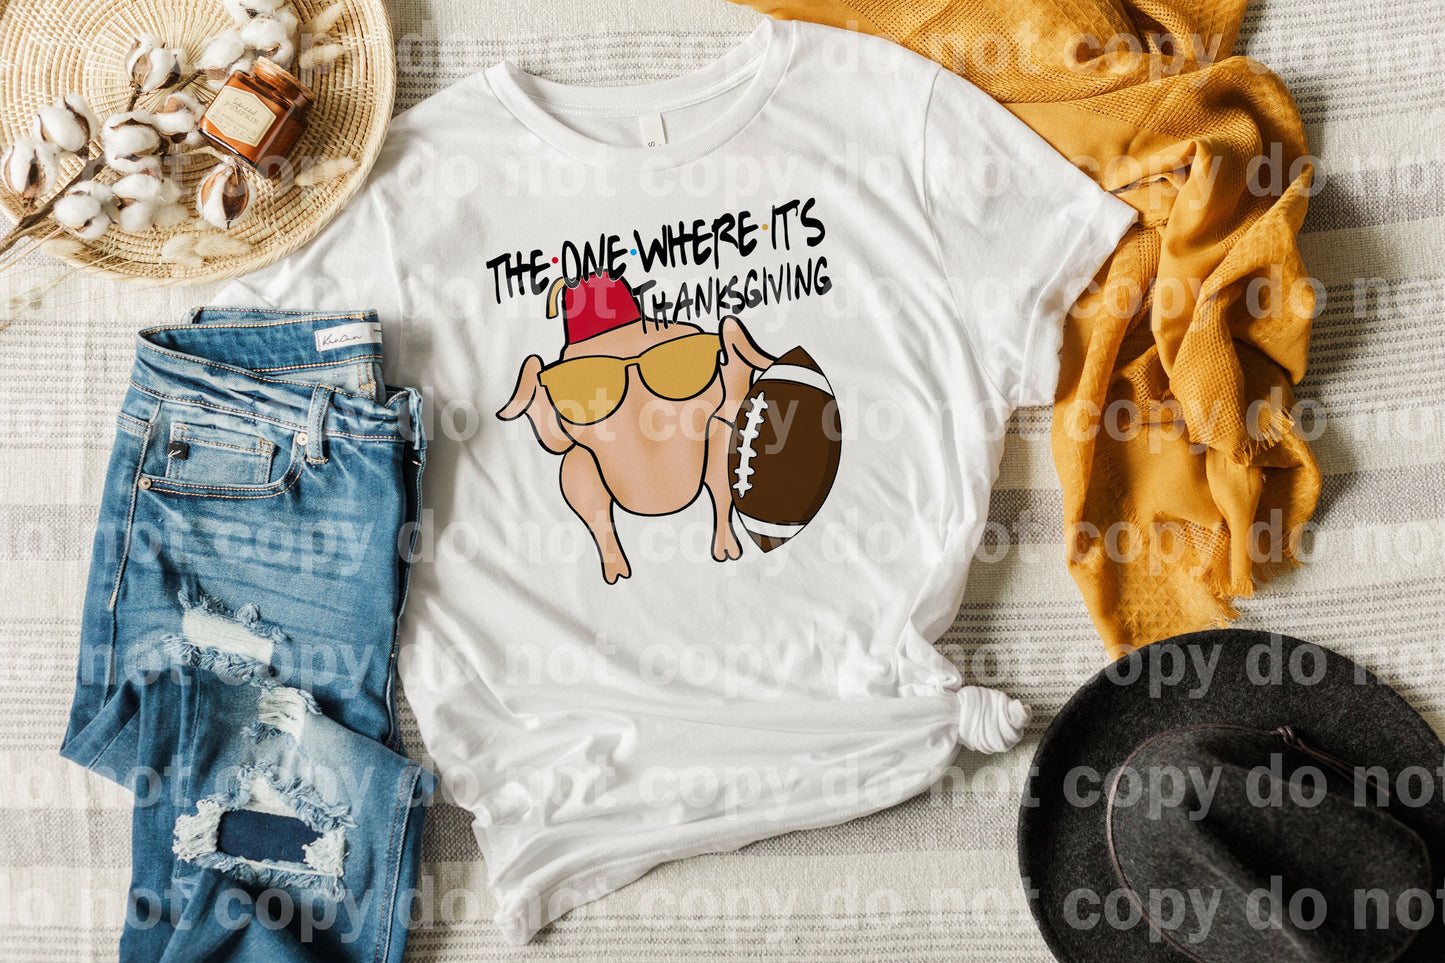 The One Where It's Thanksgiving Dream Print or Sublimation Print